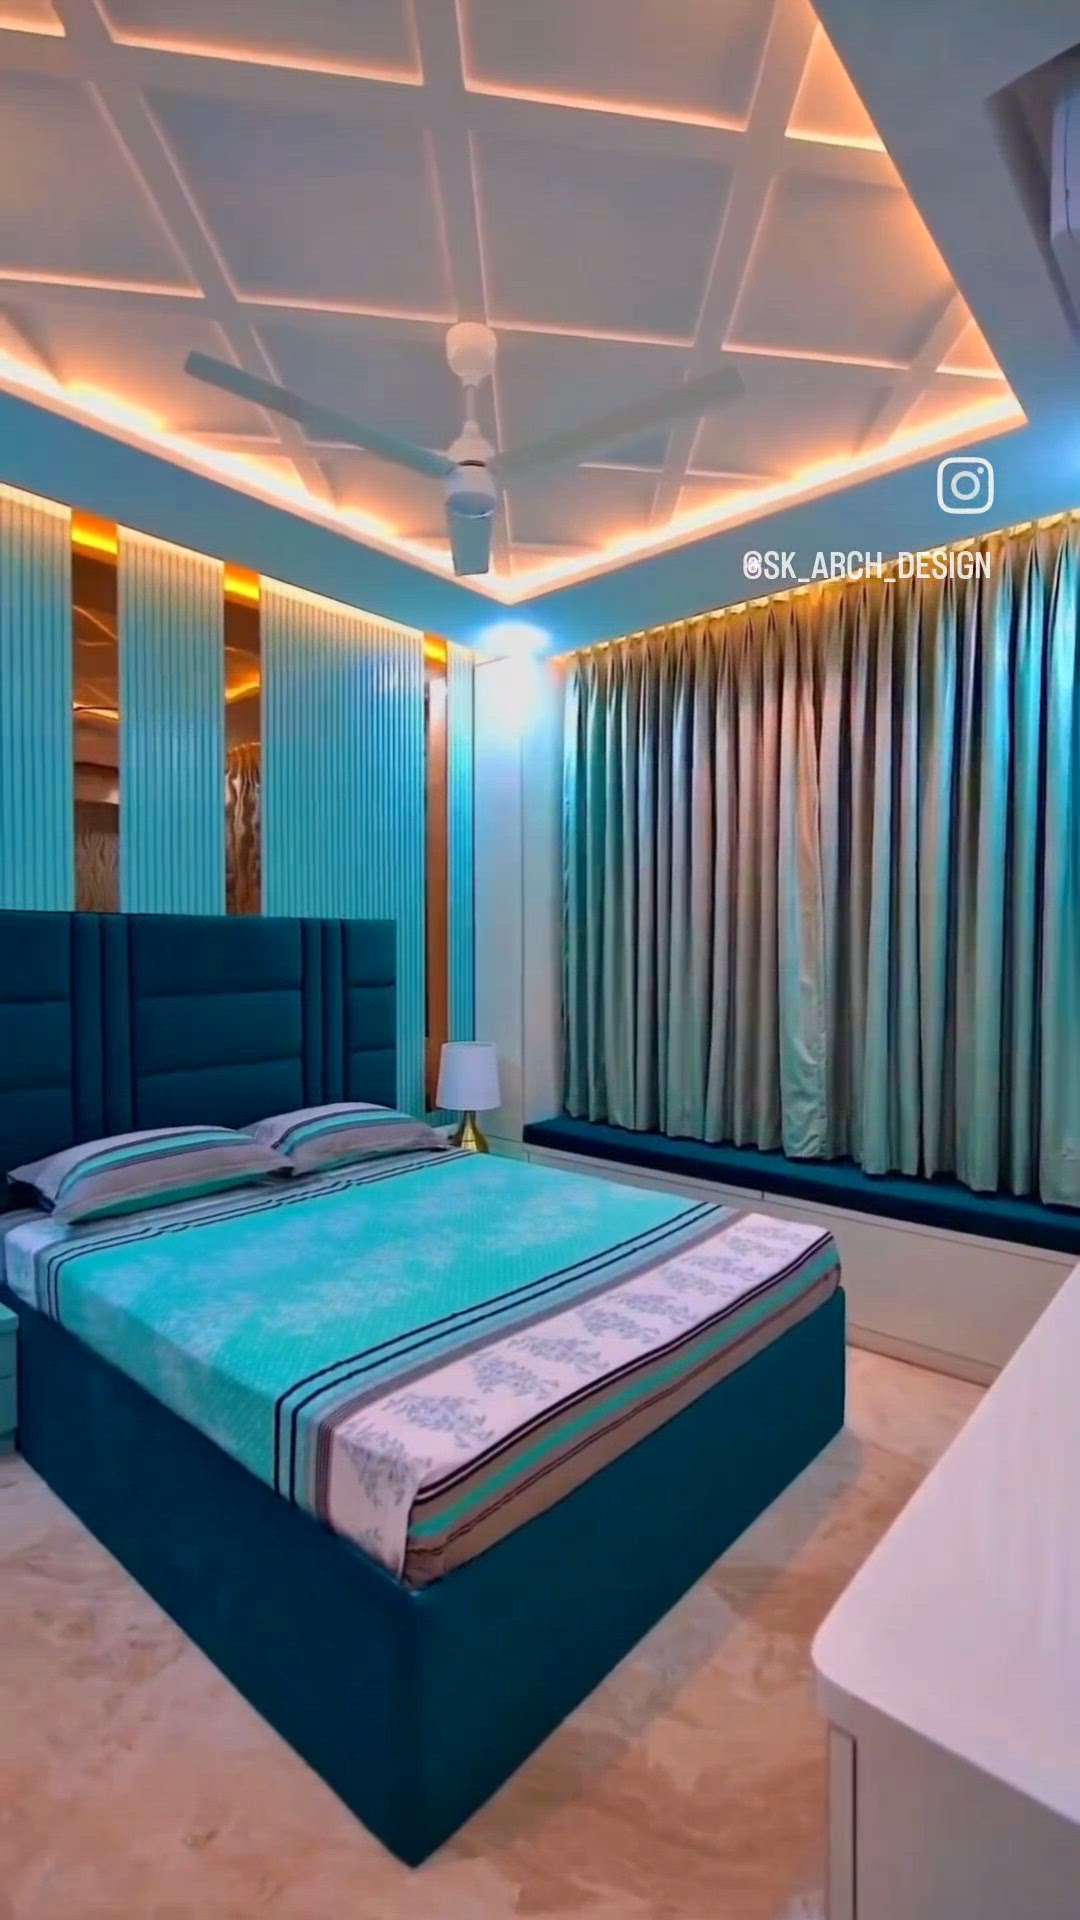 Bedroom interior design
.
.
 #Make 2D,3D according to vastu sastra give your plot size and requirements Tell me
(वास्तु शास्त्र से घर के नक्शे और डिजाईन बनवाने के लिए आप हम से  संपर्क कर सकते है )
Architect and Exterior, Interior Designer
.
Contact me on - 
SK ARCH DESIGN JAIPUR 
Email - skarchitects96@gmail.com
Website - www.skarchdesign96.com
Whatsapp - 
https://wa.me/message/ZNMVUL3RAHHDB1
Instagram - https://instagram.com/sk_arch_design?igshid=ZDdkNTZiNTM=
YouTube - https://youtube.com/@SKARCHDESIGN96

Whatsapp - +918000810298
Contact- +918000810298
.
.
#exterior_Work #InteriorDesigner #HouseDesigns #houseplanning #Structural_Drawing #HouseConstruction #Architectural&nterior #designers #Electrical #rcpdrawing #coloumn_footing #StructureEngineer #plumbingdrawing #TraditionalHouse #Designs #houseviews #KitchenIdeas #roominterior #FlooringSolutions #FloorPlans #exteriordesigners